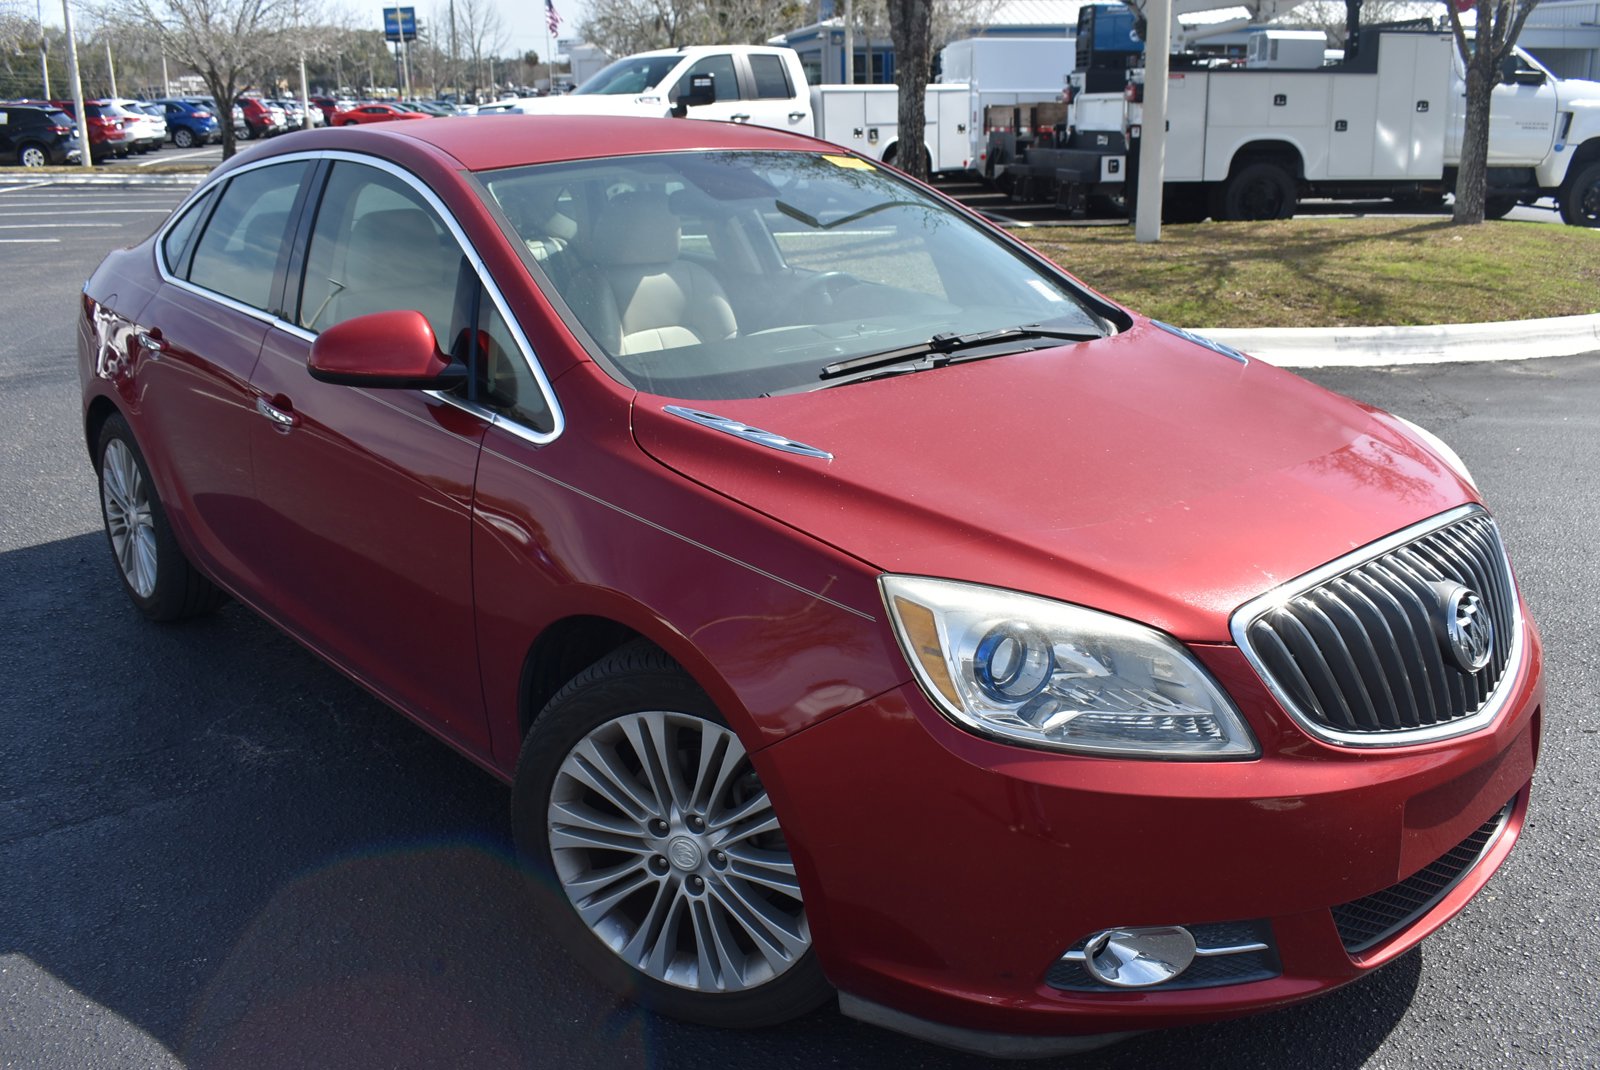 Pre-Owned 2014 Buick Verano 4dr Sdn Sedan in Cary #Q30366A | Hendrick Dodge  Cary